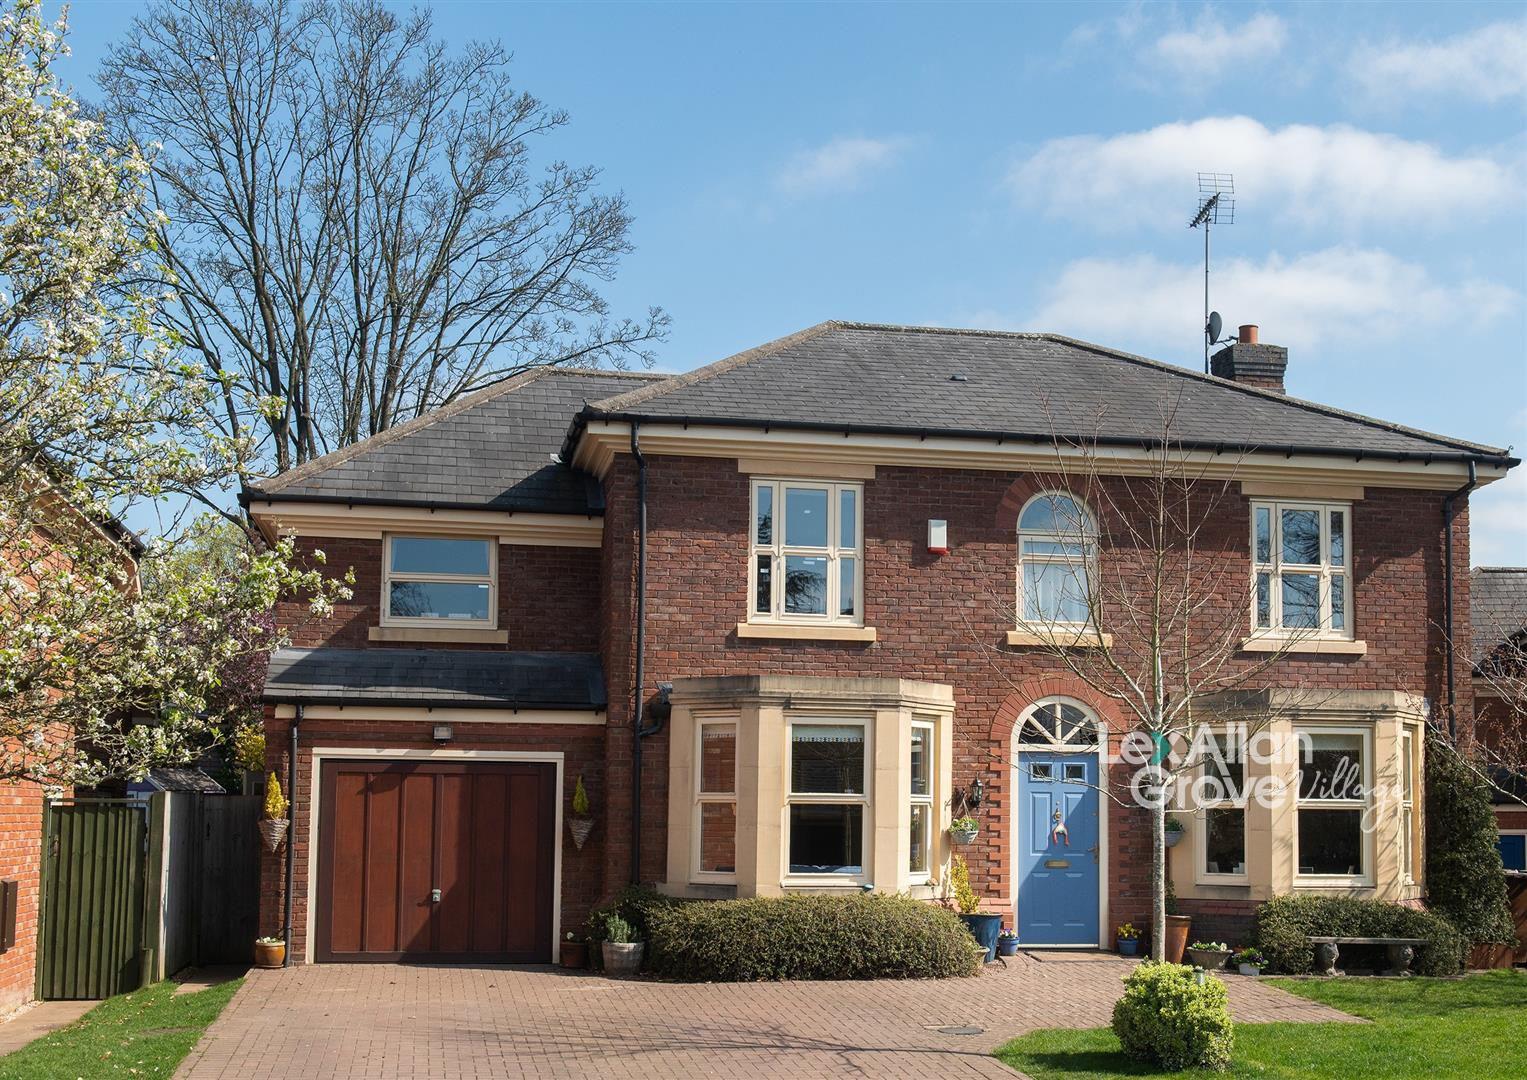 5 bed detached house for sale in The Oasis, Stourbridge, DY9 